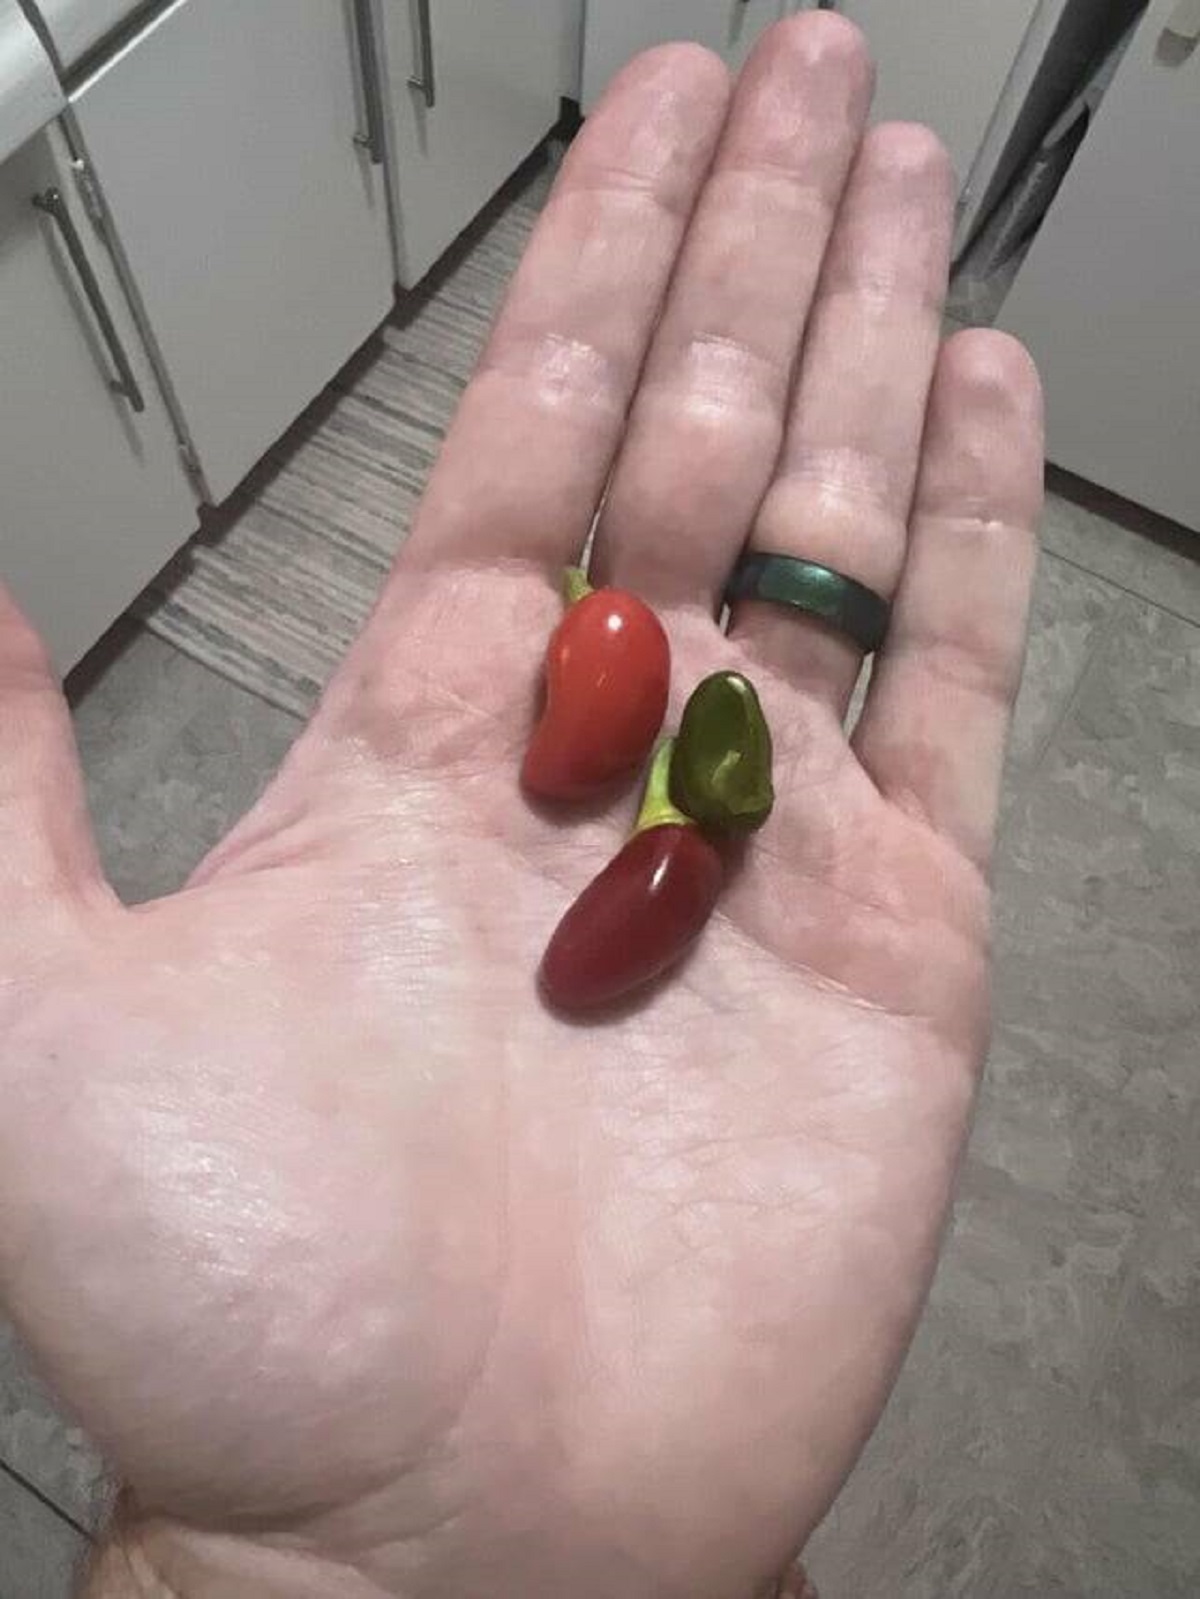 "My Jalapeno harvest this year."